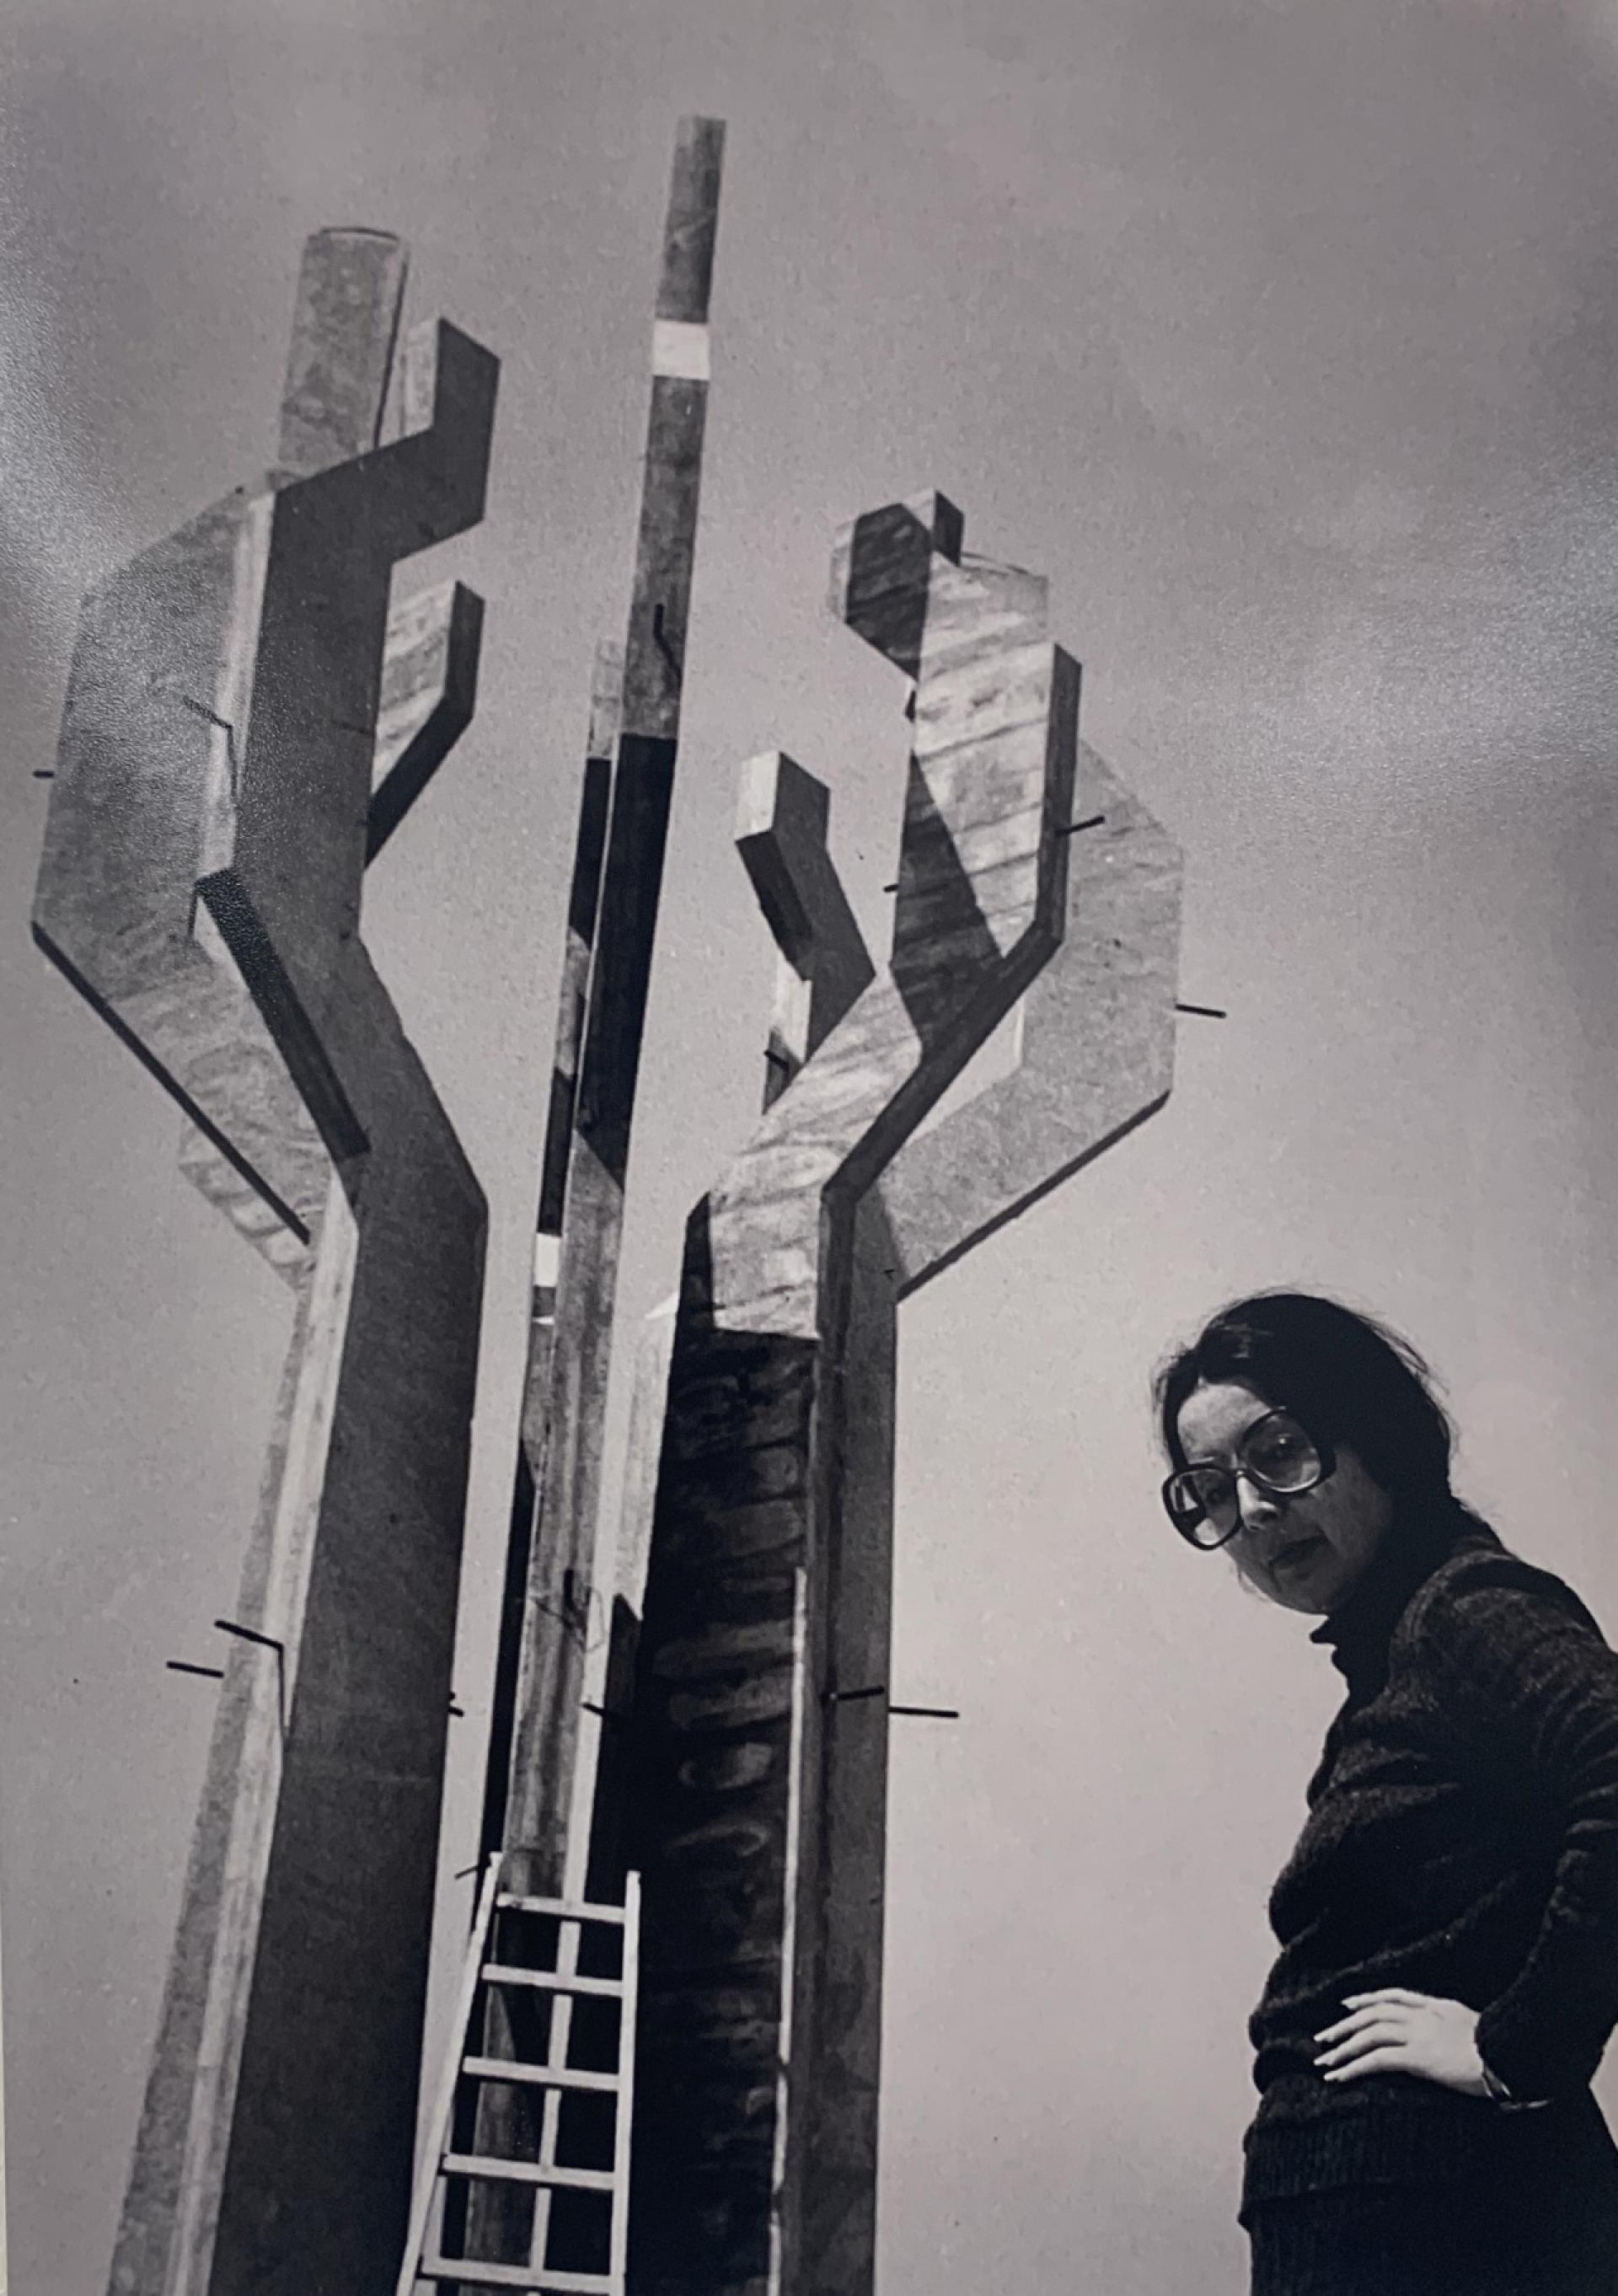 Kana in front of her monument in Barutana. | Portrait prints from Radević’s photo archive - shown in the exhibition “Skirting the Center Svetlana Kana Radević, on the Periphery of Postwar Architecture”